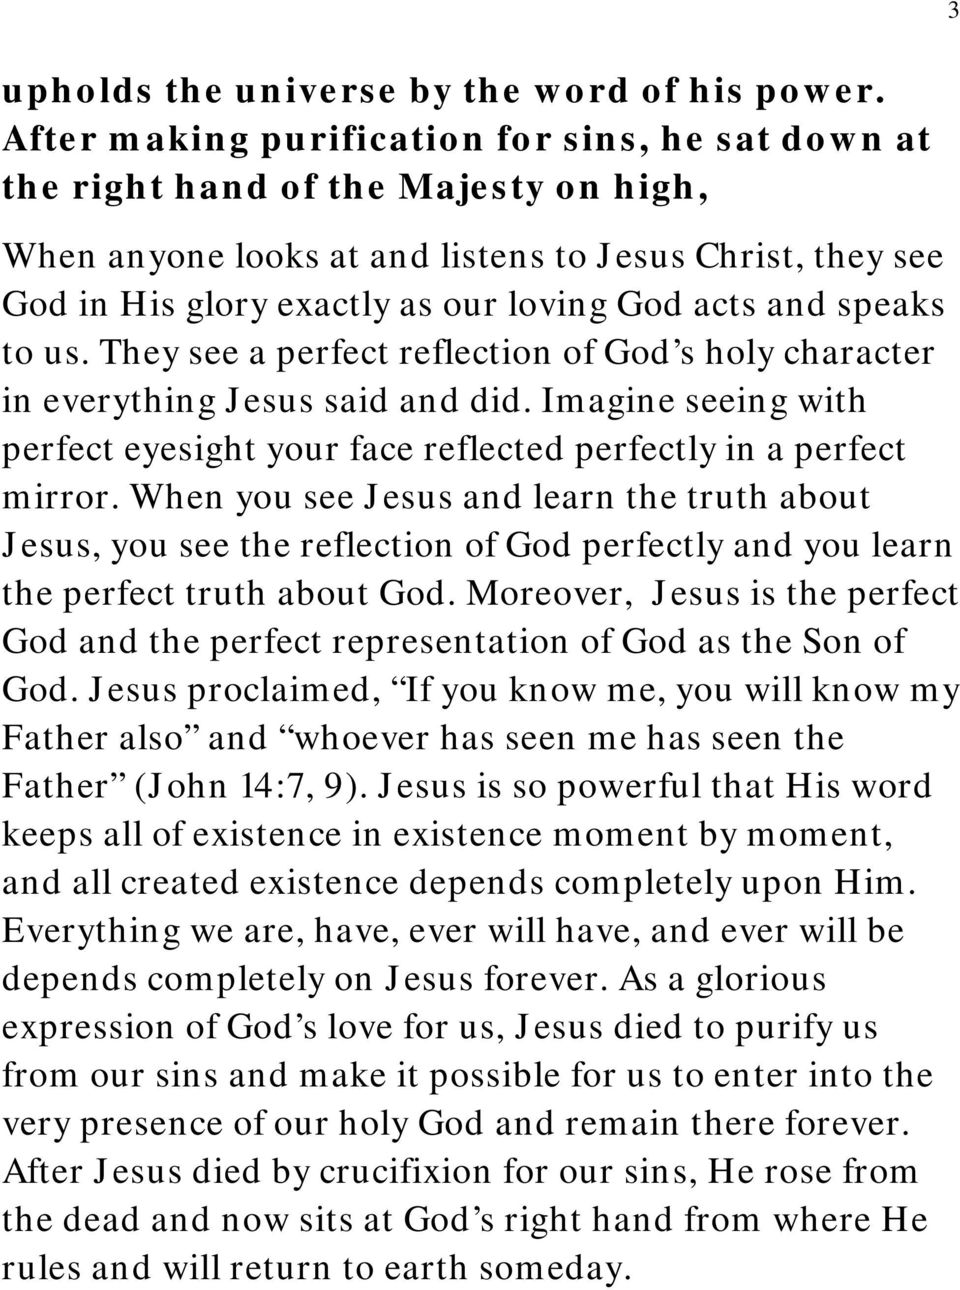 and speaks to us. They see a perfect reflection of God s holy character in everything Jesus said and did. Imagine seeing with perfect eyesight your face reflected perfectly in a perfect mirror.